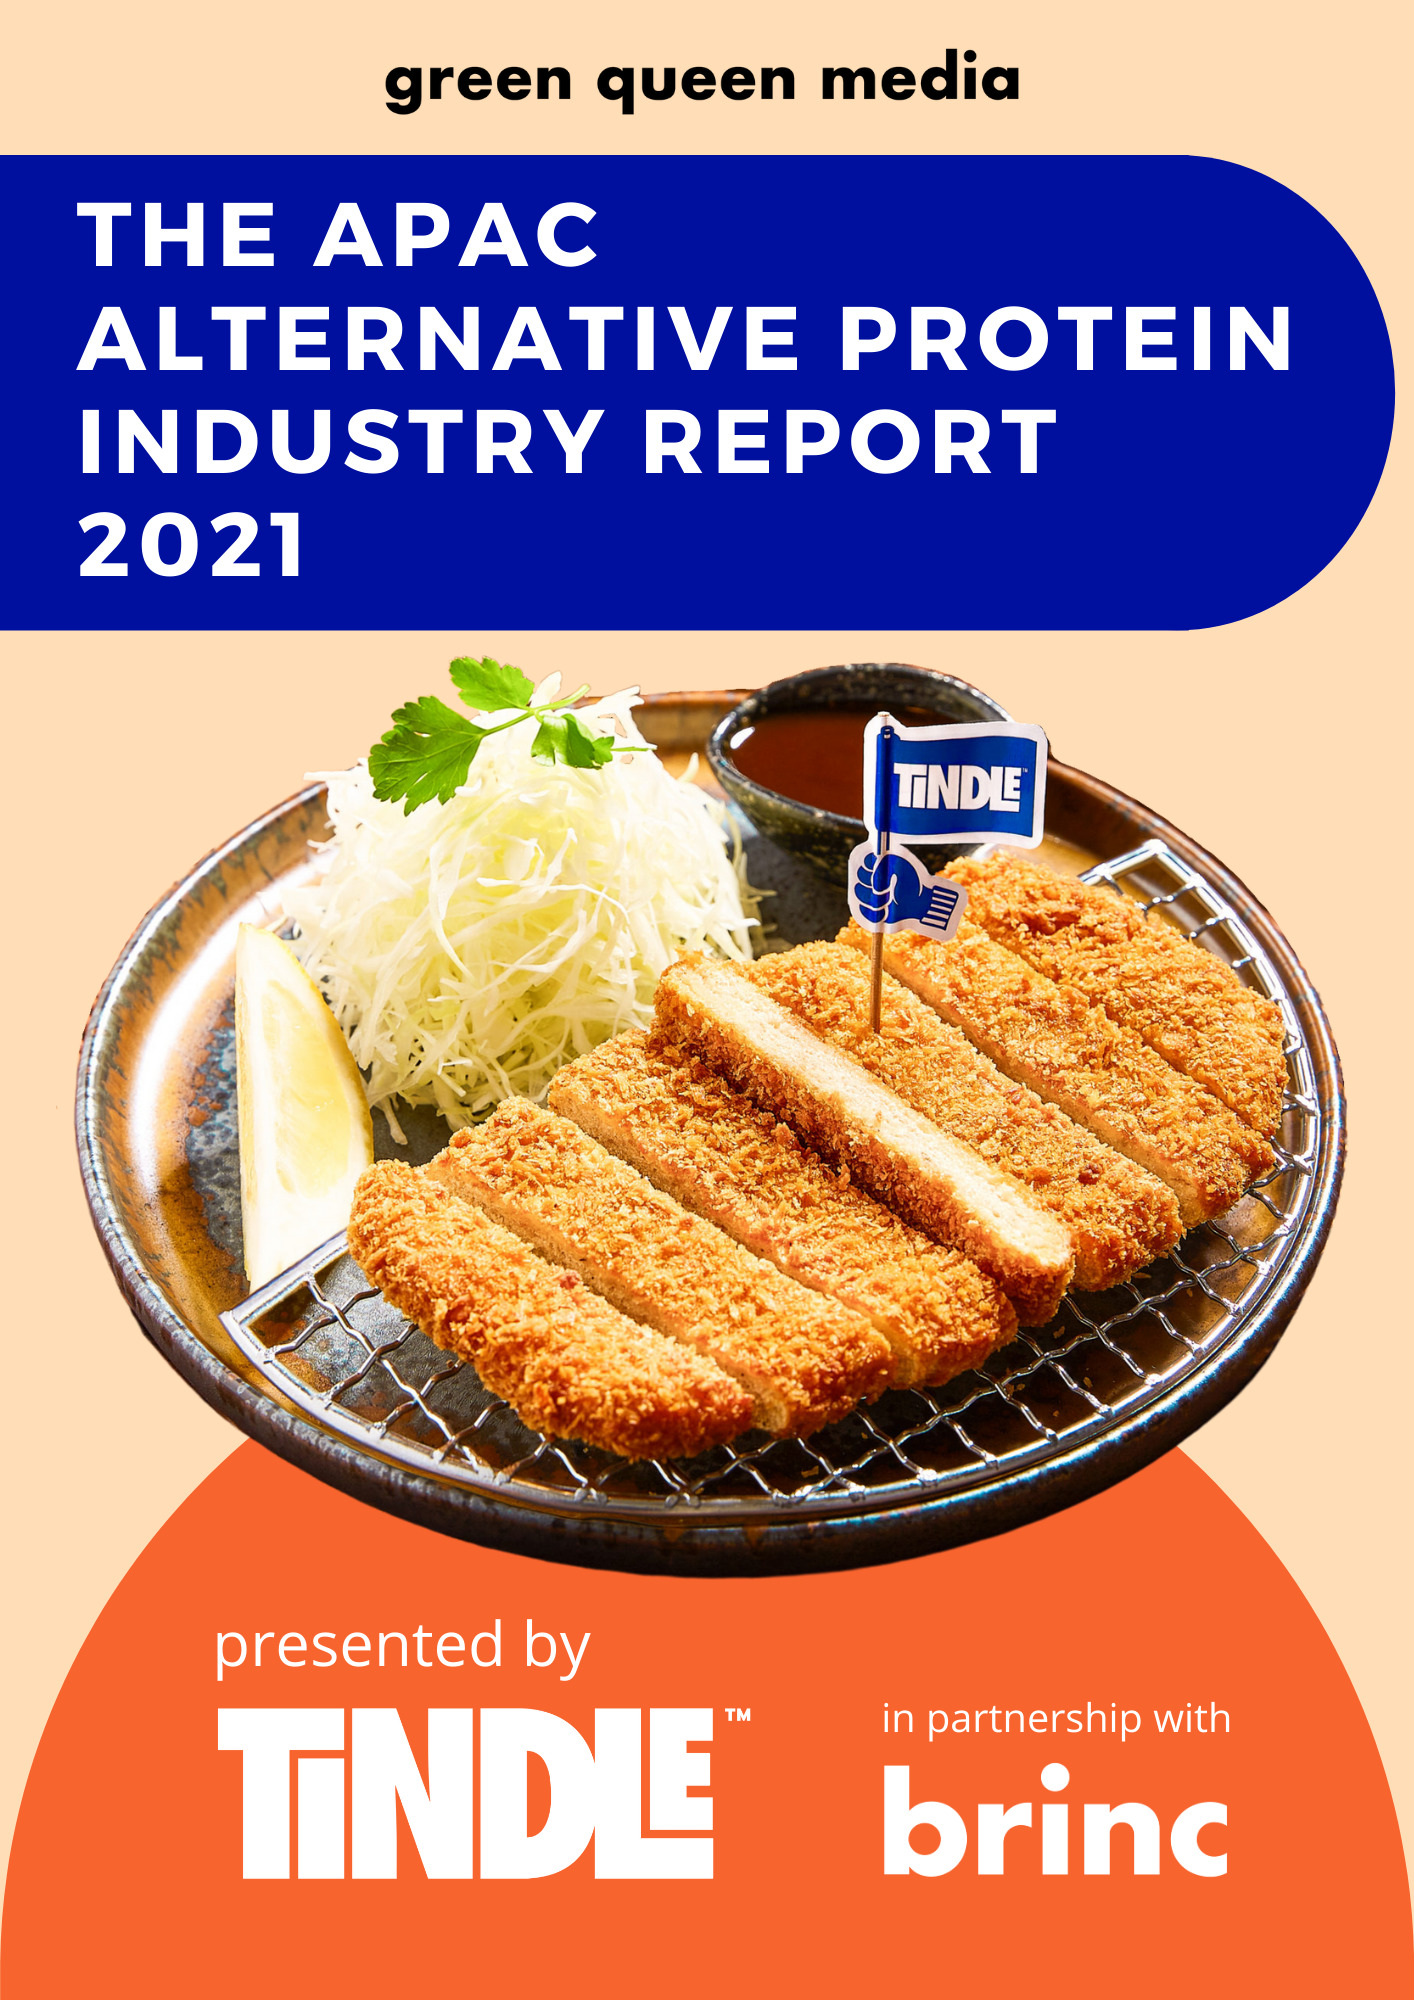 The APAC Alternative Protein Industry Report 2021